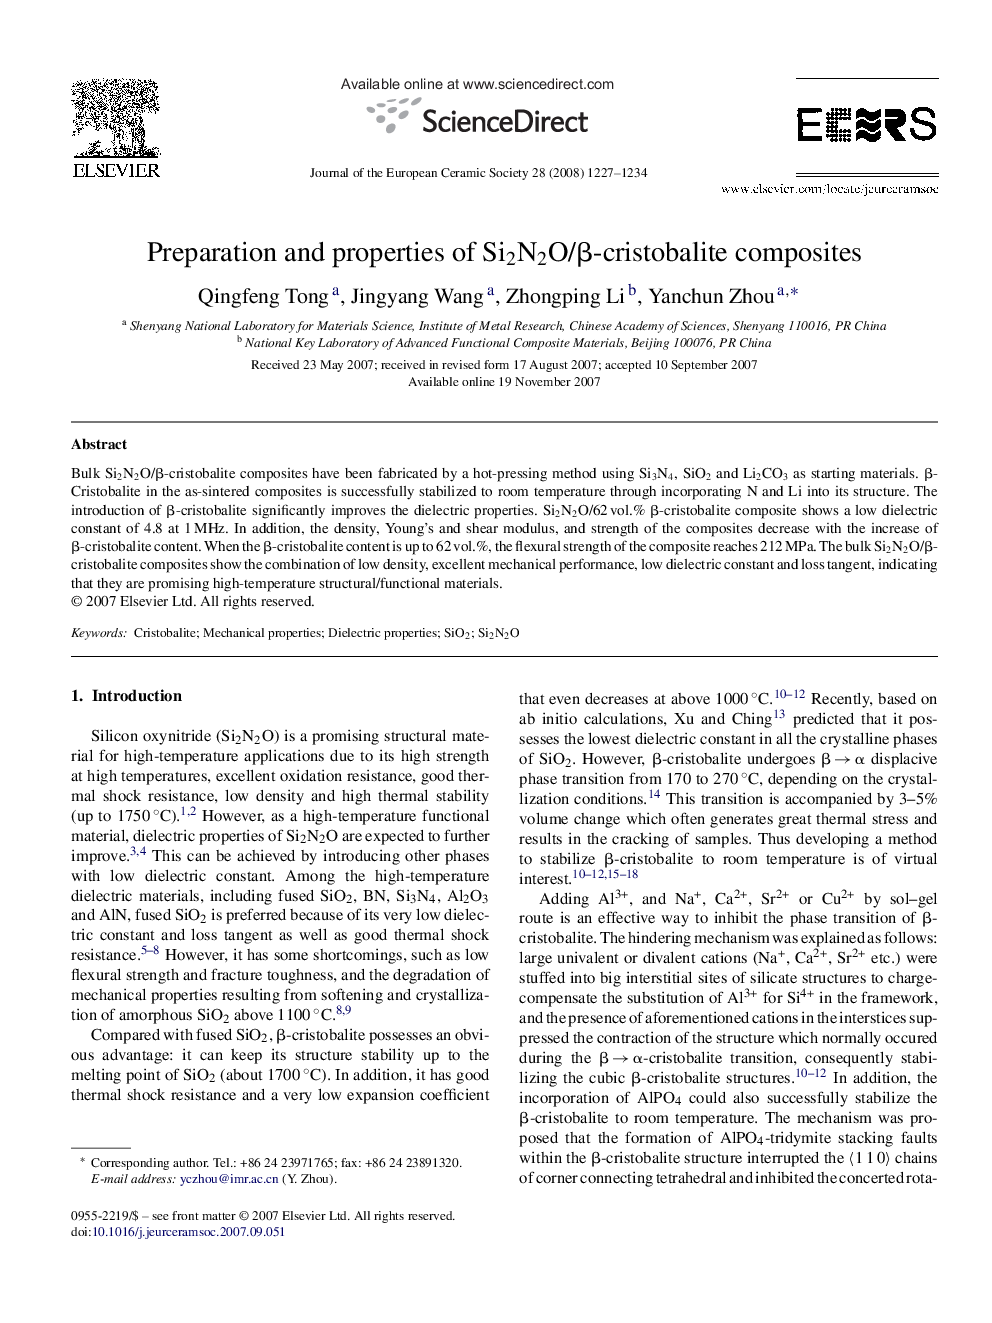 Preparation and properties of Si2N2O/β-cristobalite composites